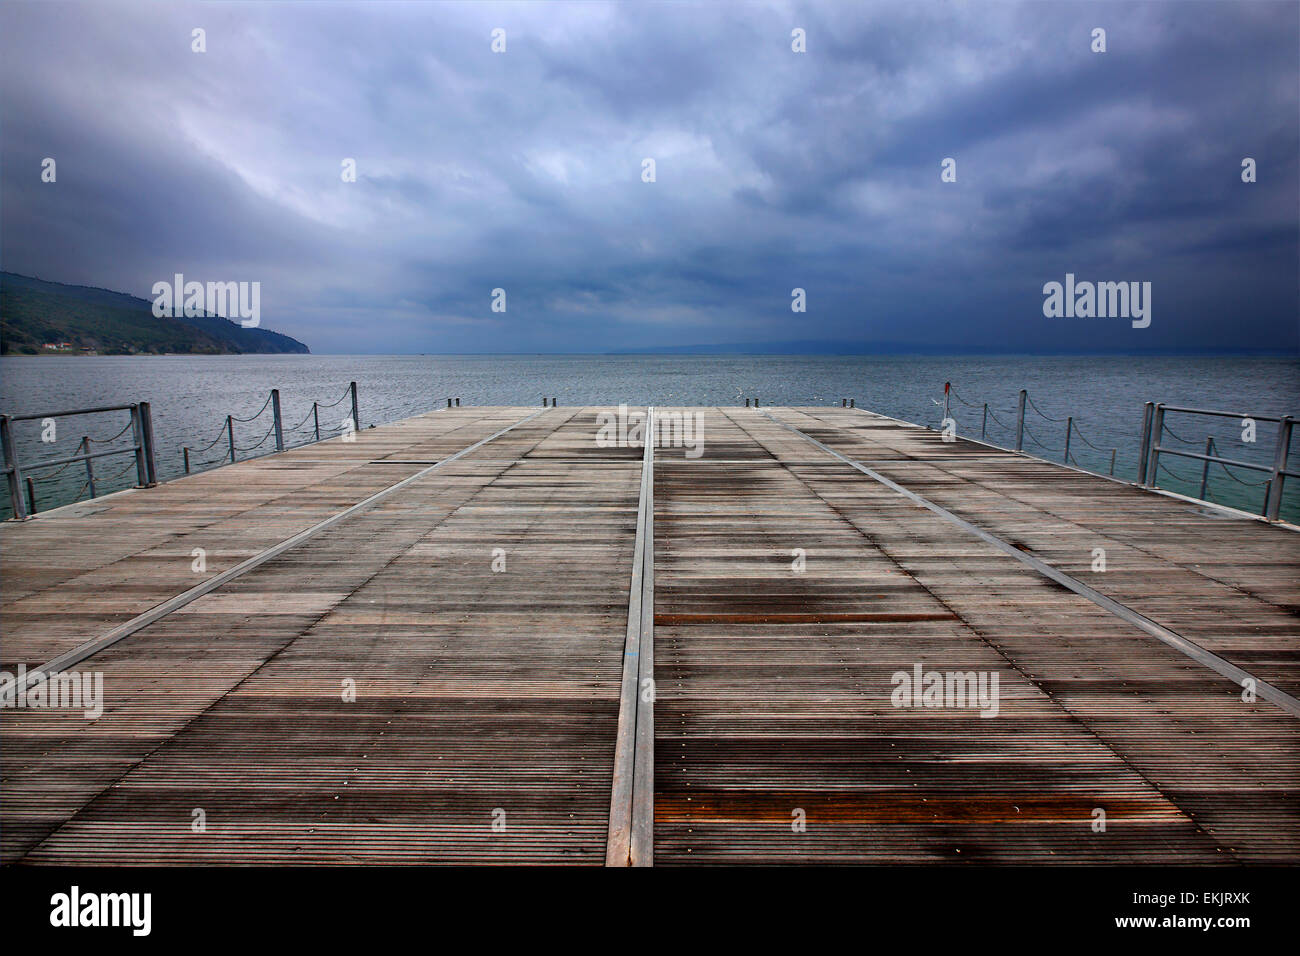 Jetty at Limni, one of the most beautiful towns of Evia (Euboea) island (Greece). Stock Photo